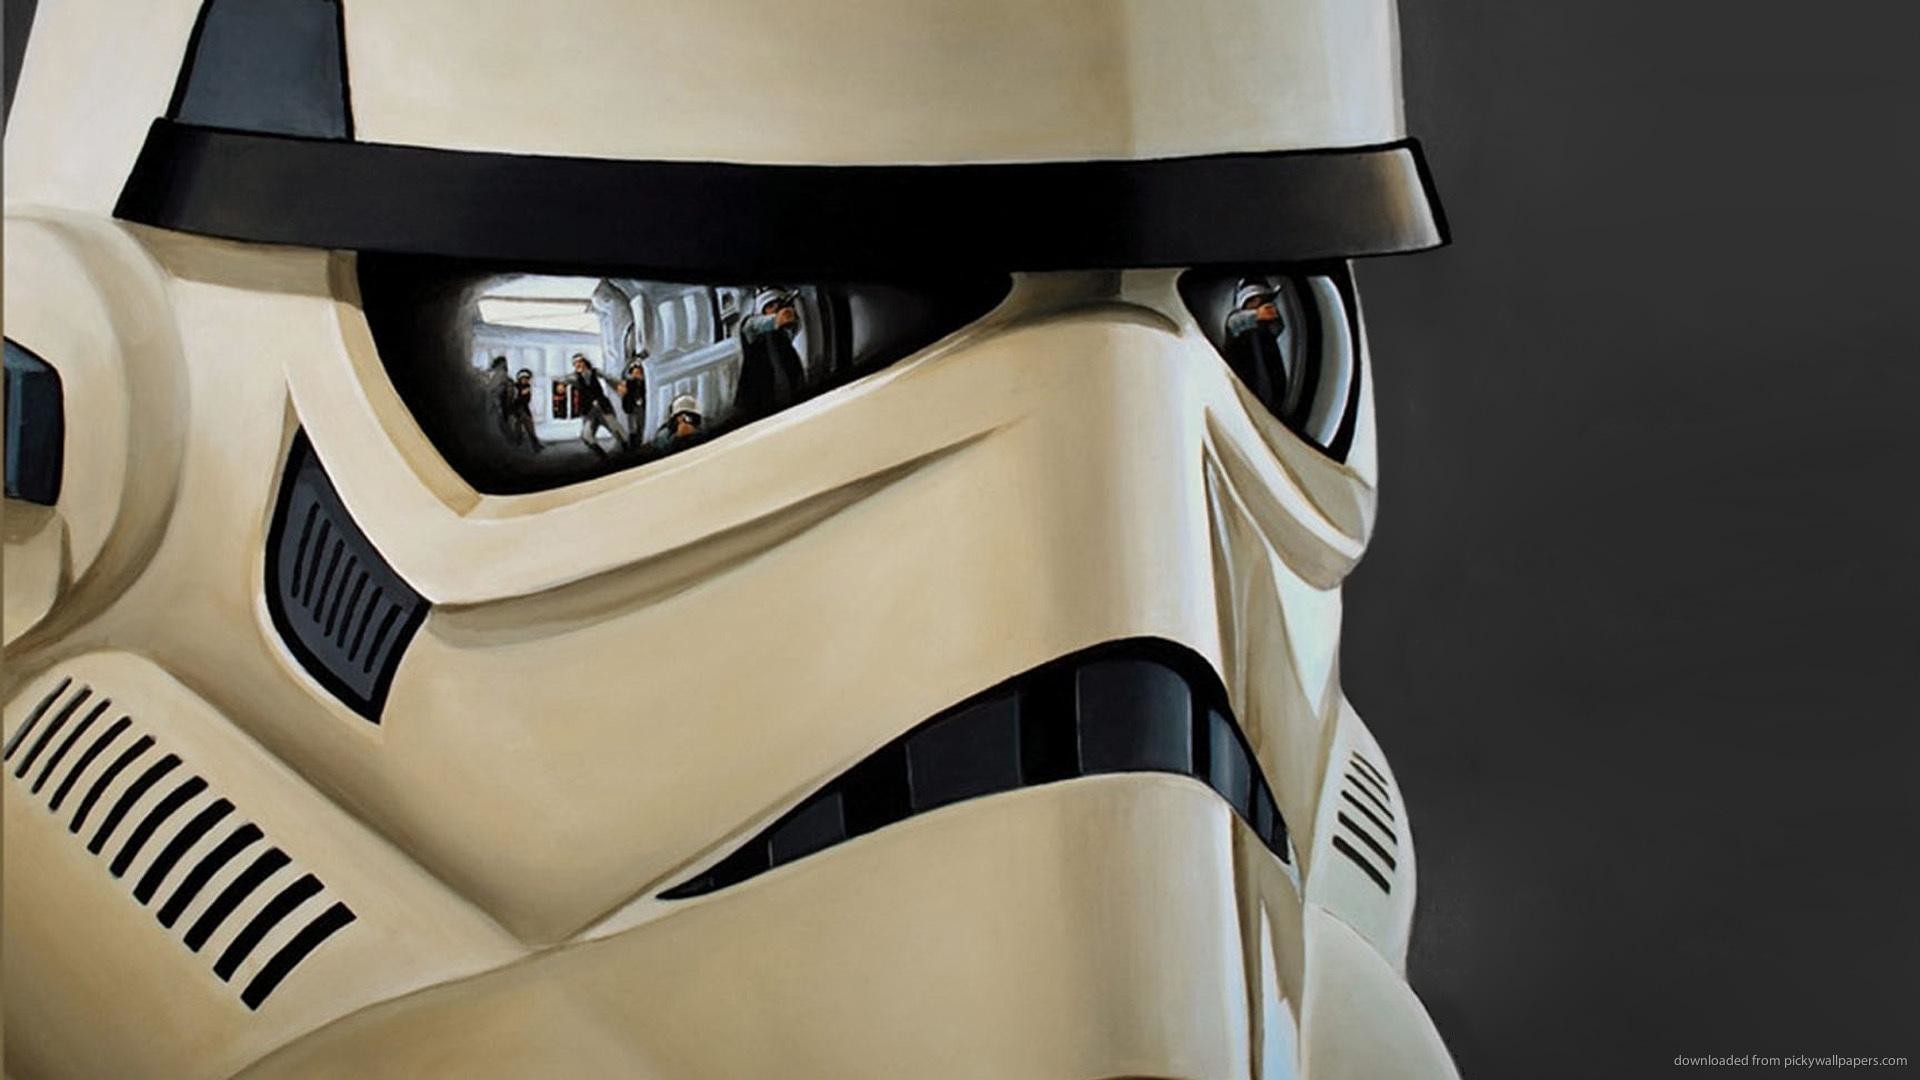 1920x1080 Stormtrooper-with-reflections-in-his-visors-for--. wallpaper -wp4001743